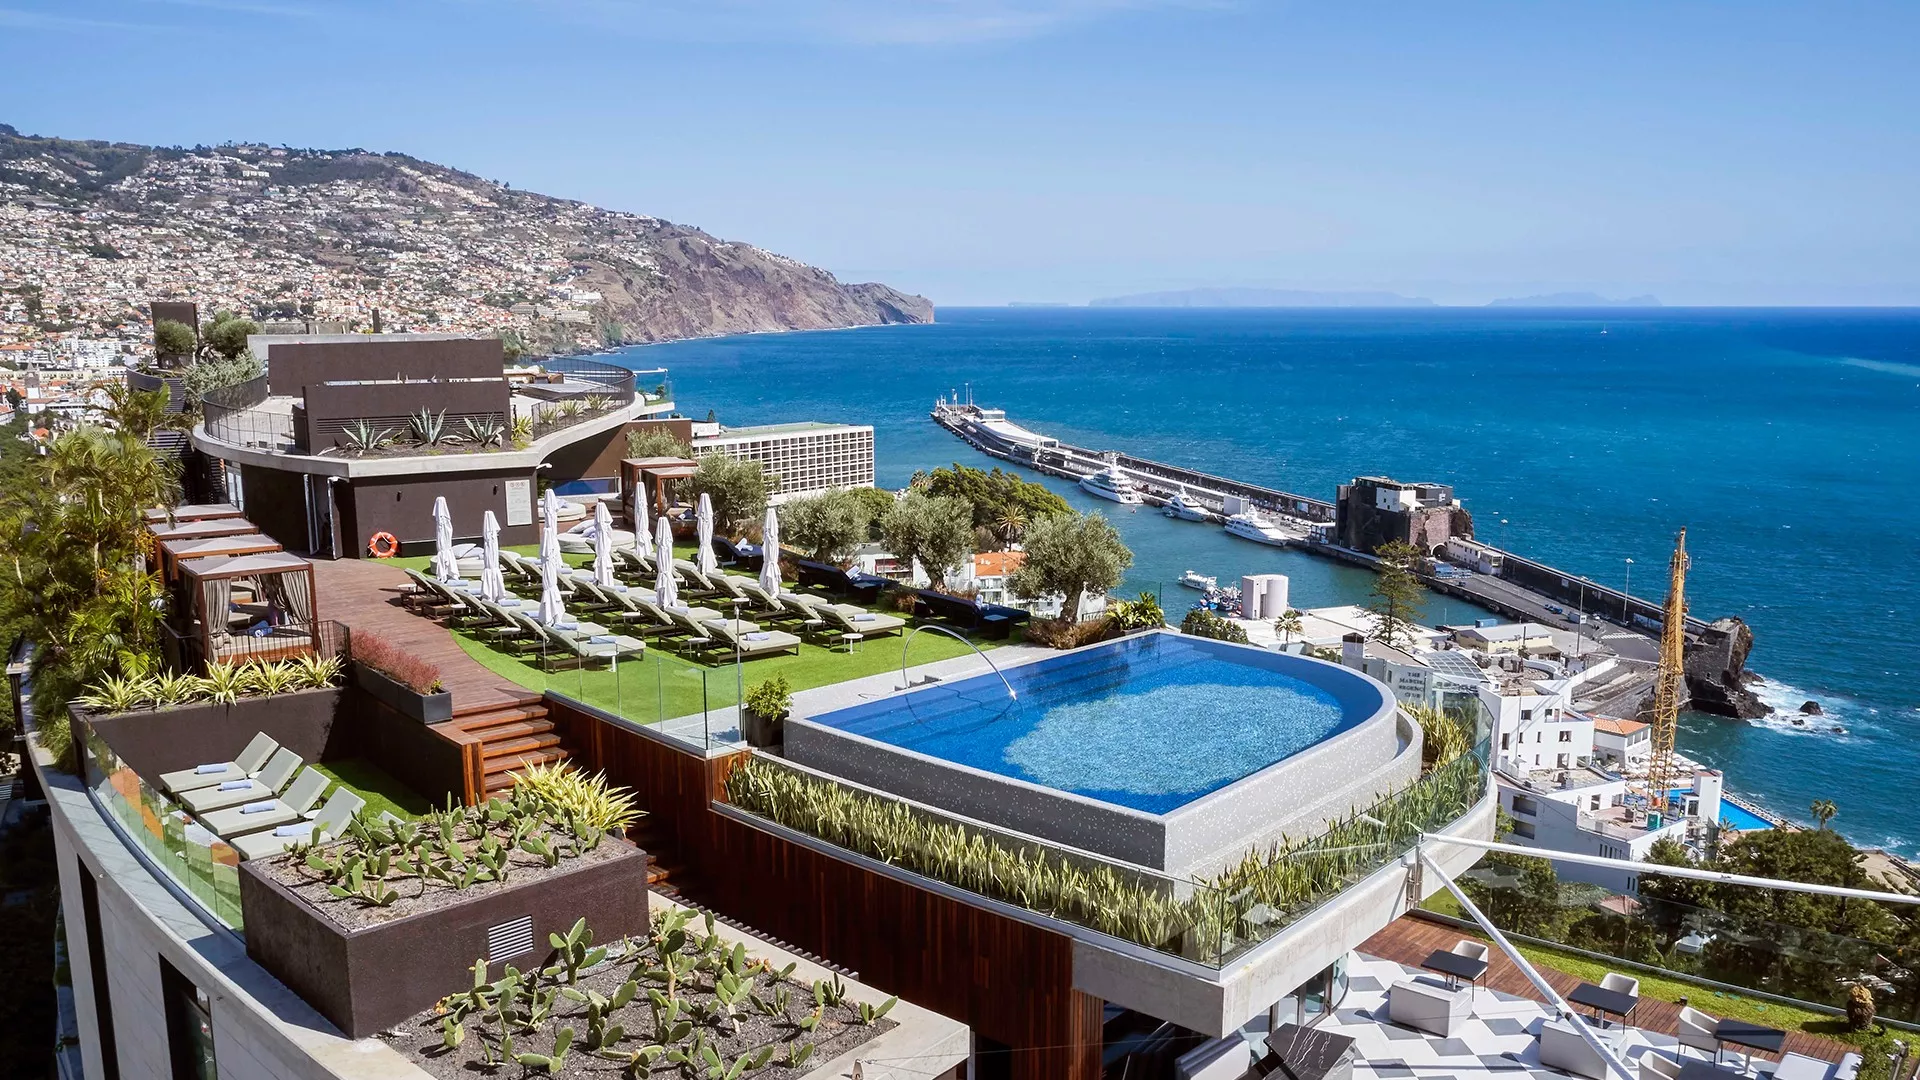 Madeira Regency Club in Portugal, Europe | Observation Decks,Swimming - Rated 3.4